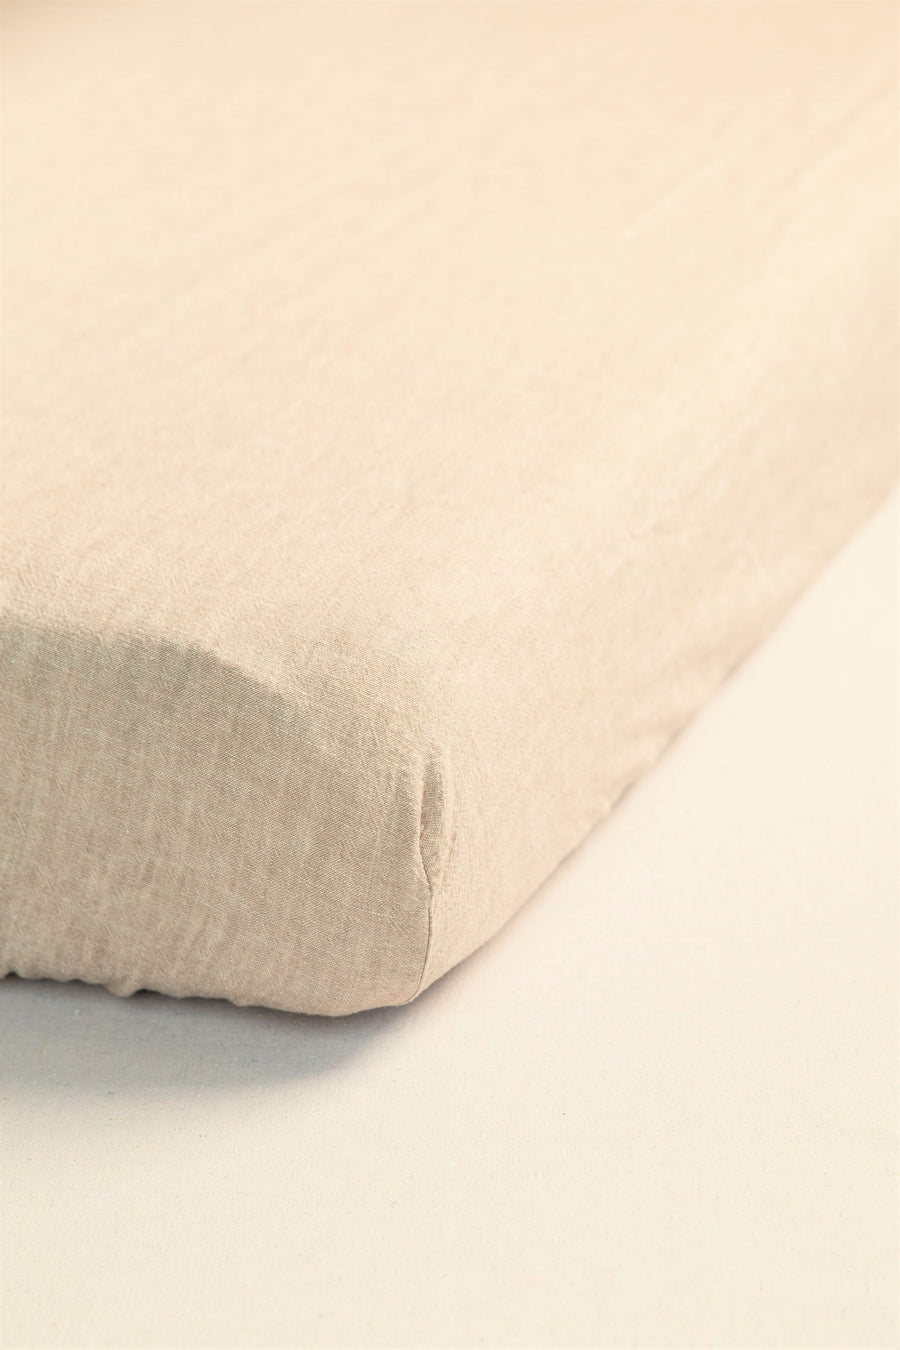 Fitted Sheets, Conventional Beds, Organic 100% Cotton,